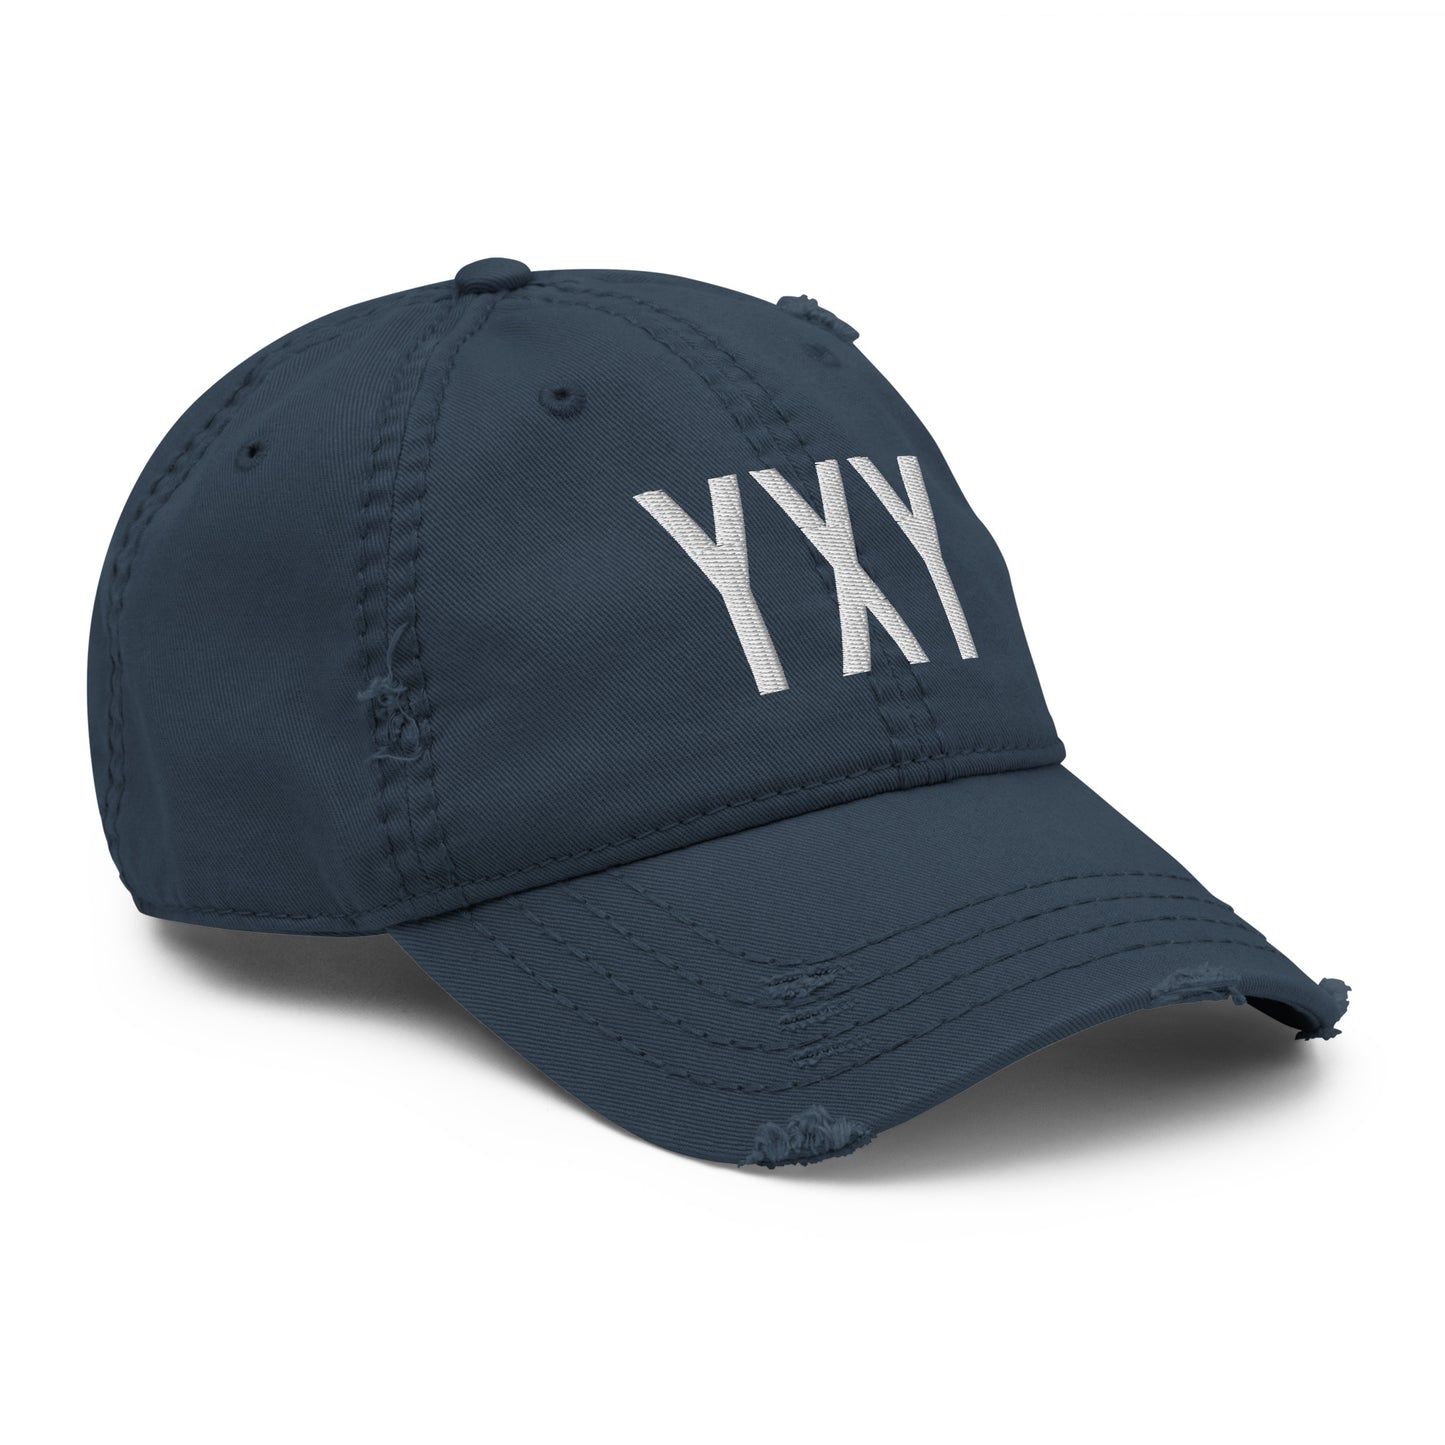 Airport Code Distressed Hat - White • YXY Whitehorse • YHM Designs - Image 14